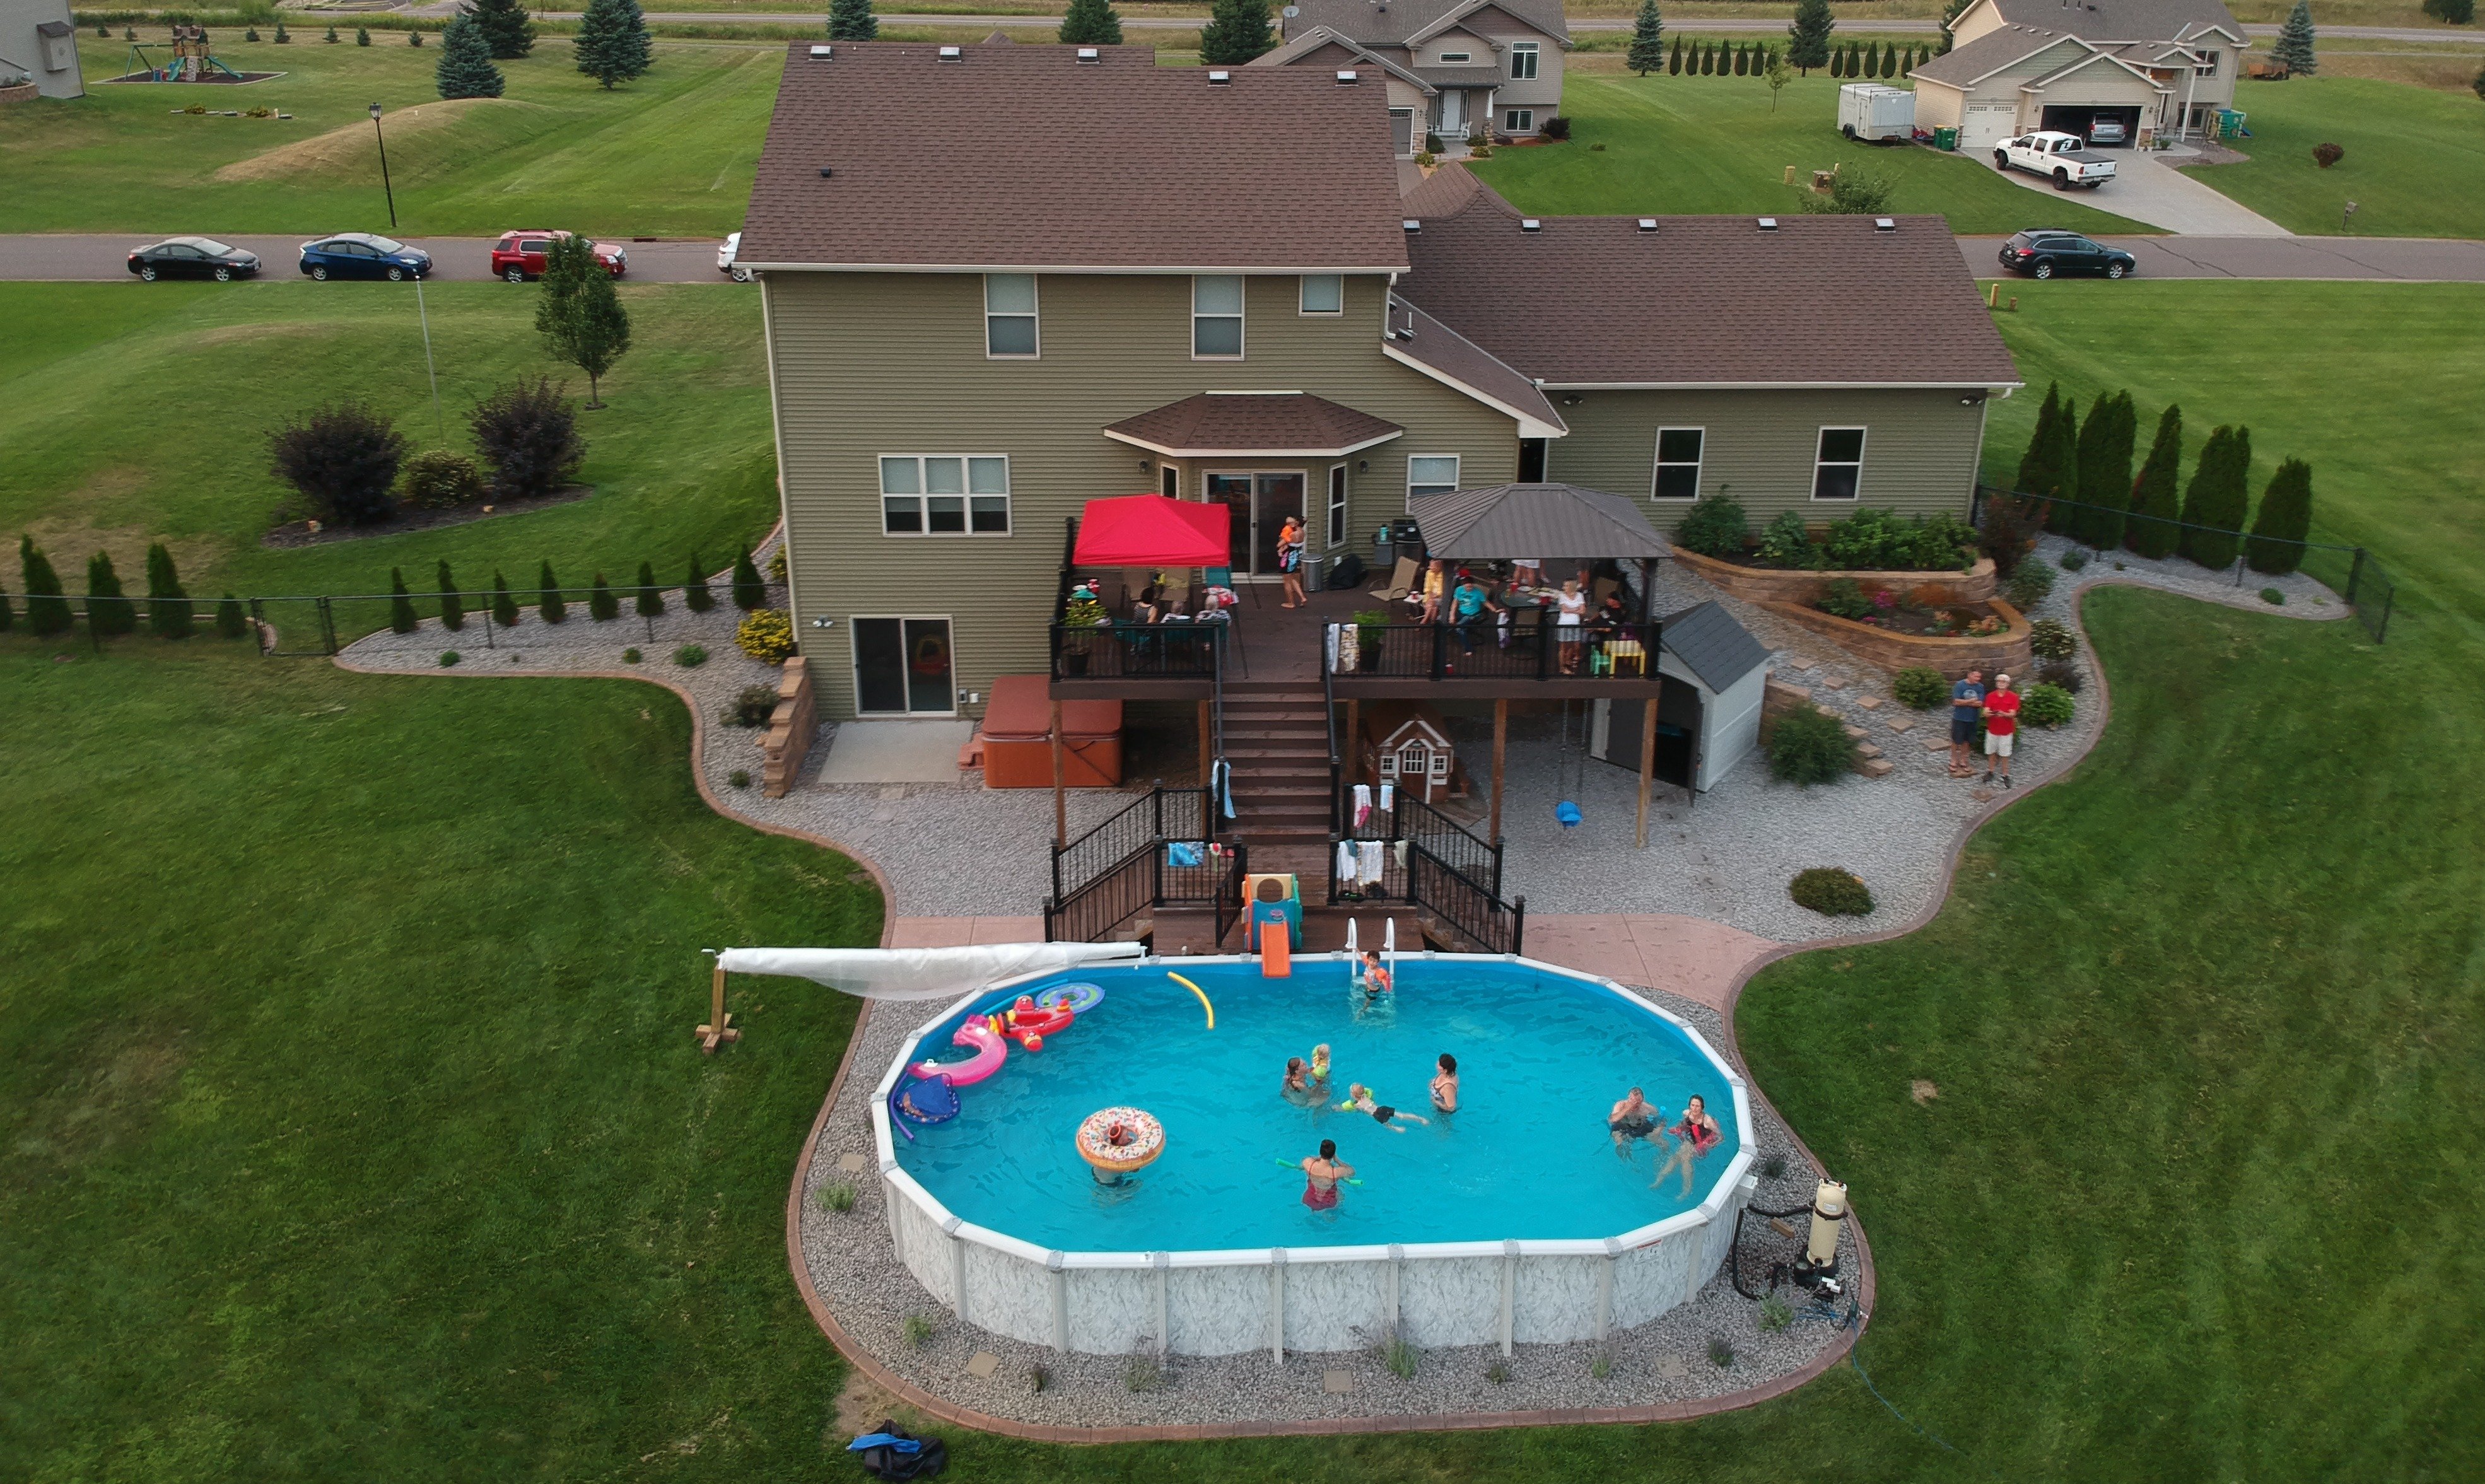 How much does it cost to install an above ground swimming pool